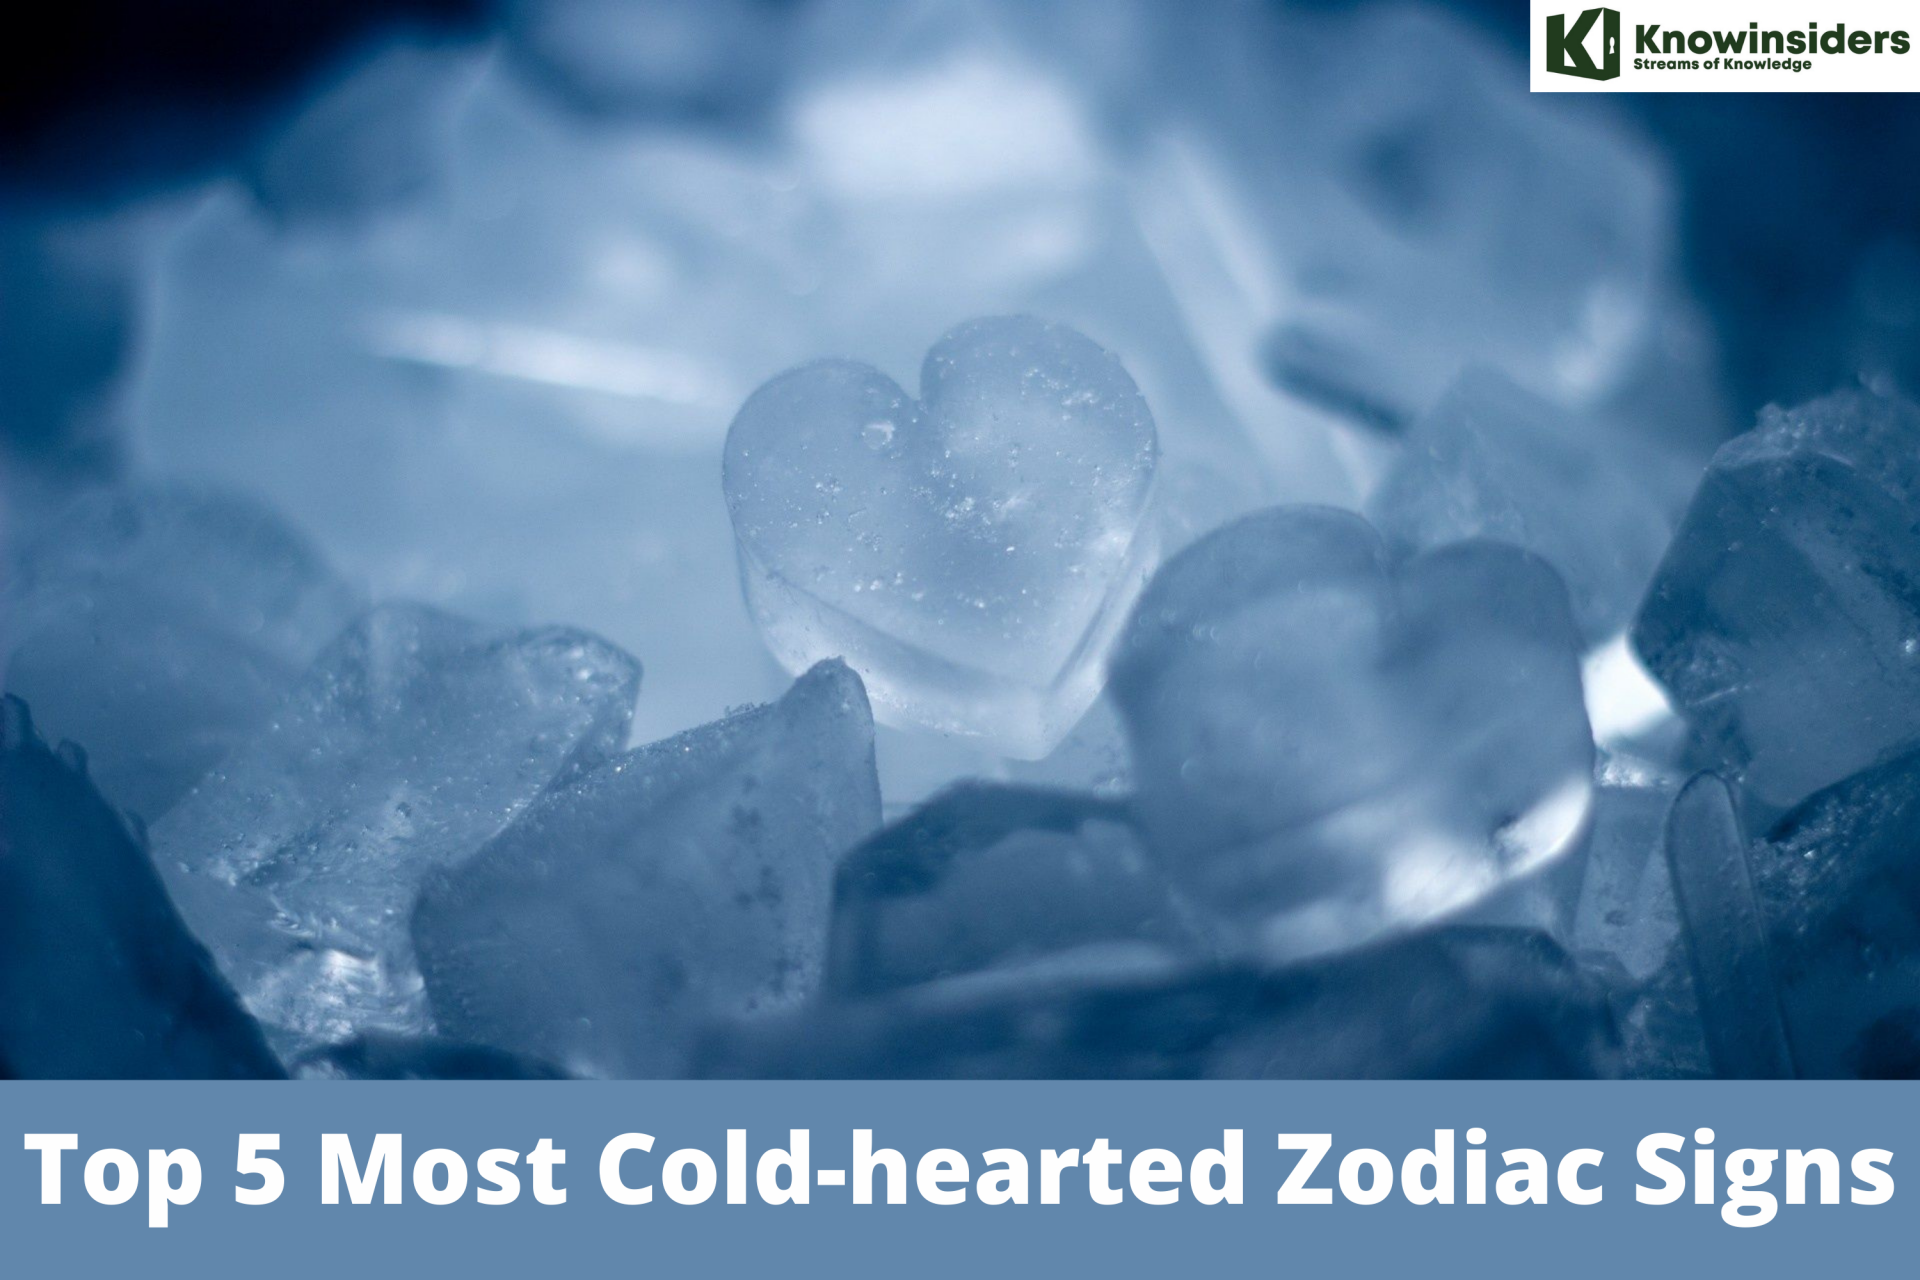 Top 5 Most Cold-Hearted Zodiac Signs According to Astrology